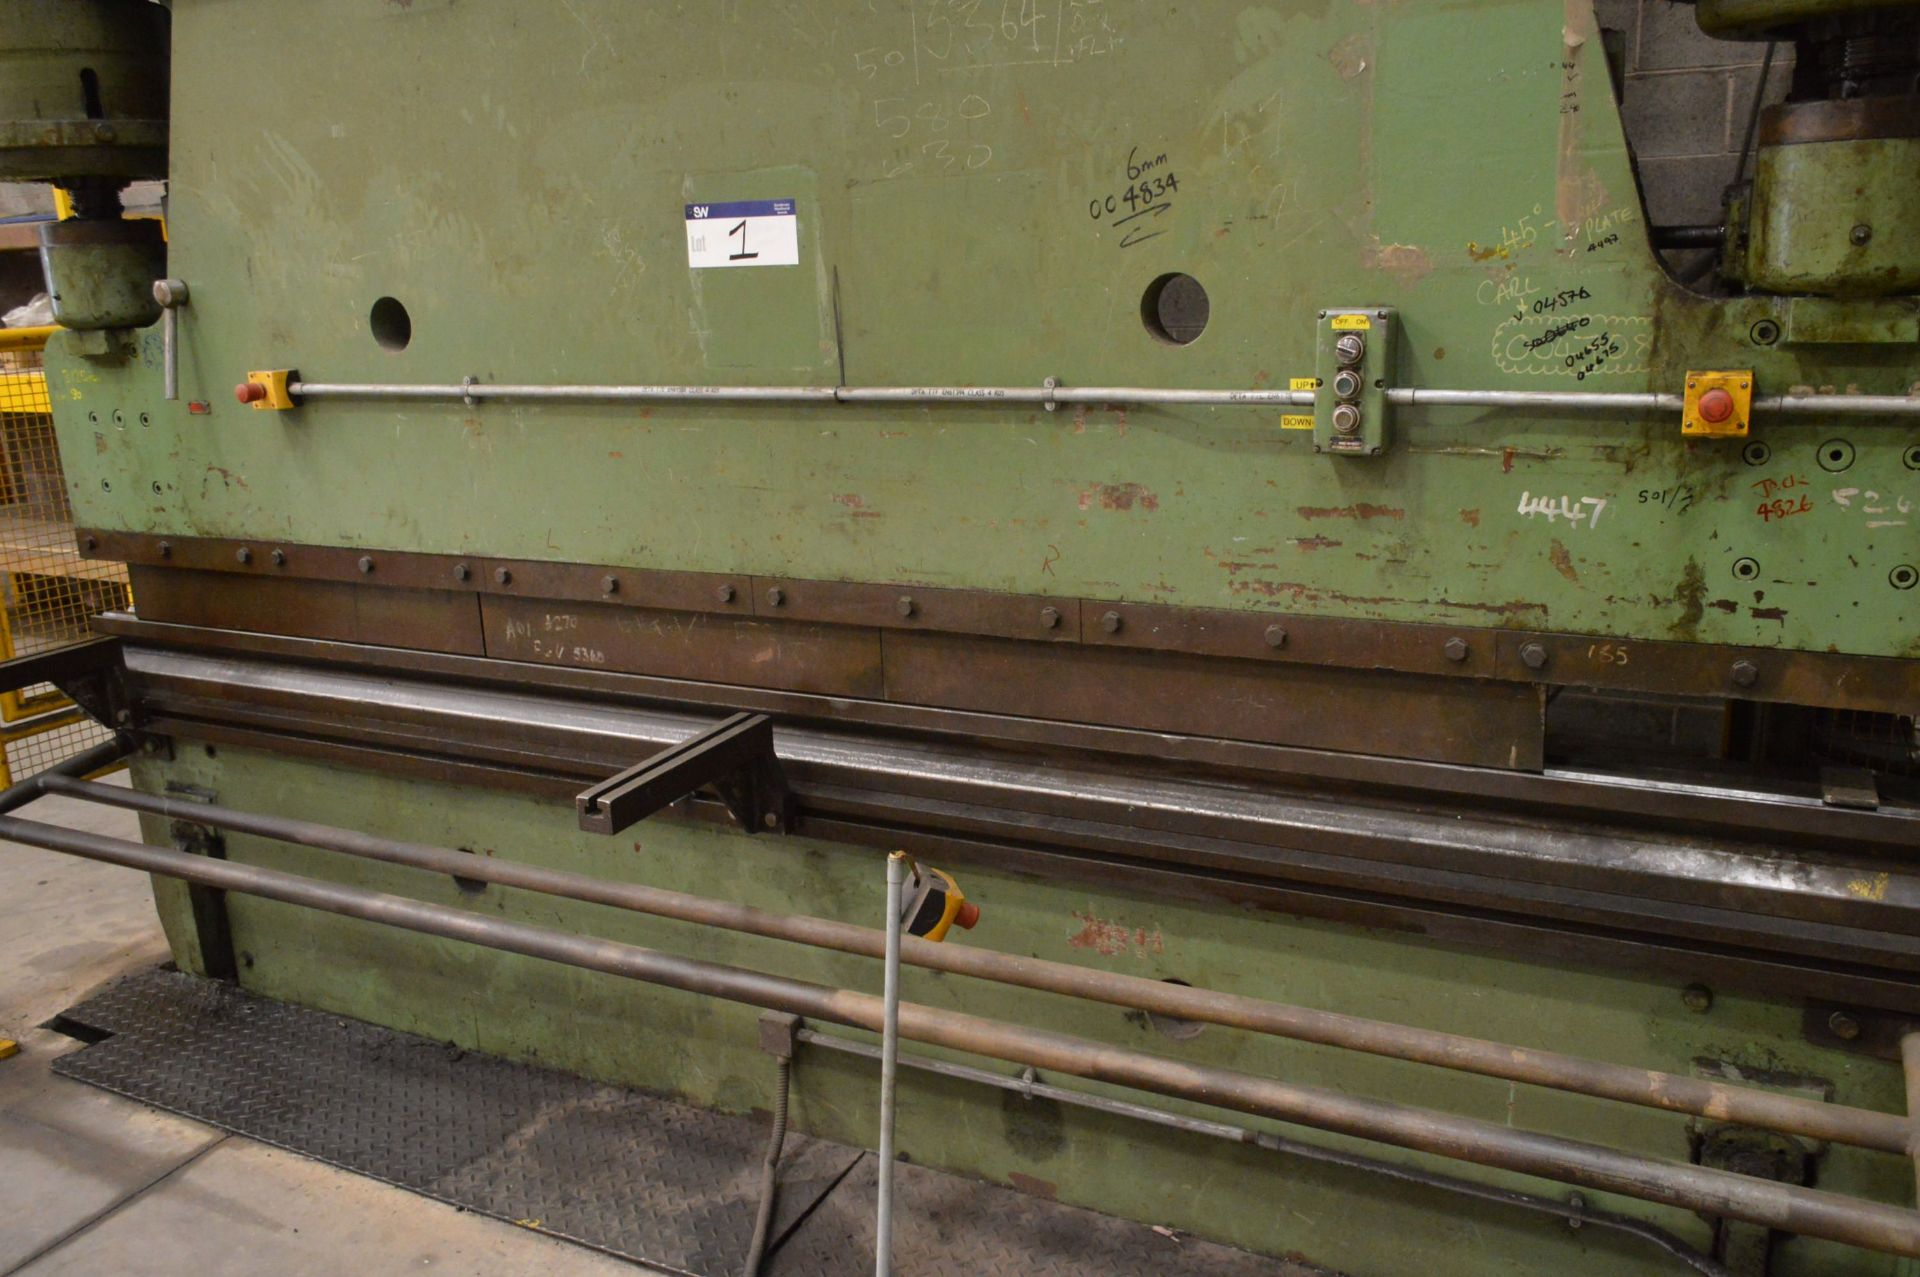 Bronx 200.220.10.H 160 tonne HYDRAULIC PRESS BRAKE, serial no. 30675, 12ft wide, with Sick infra-red - Image 3 of 8